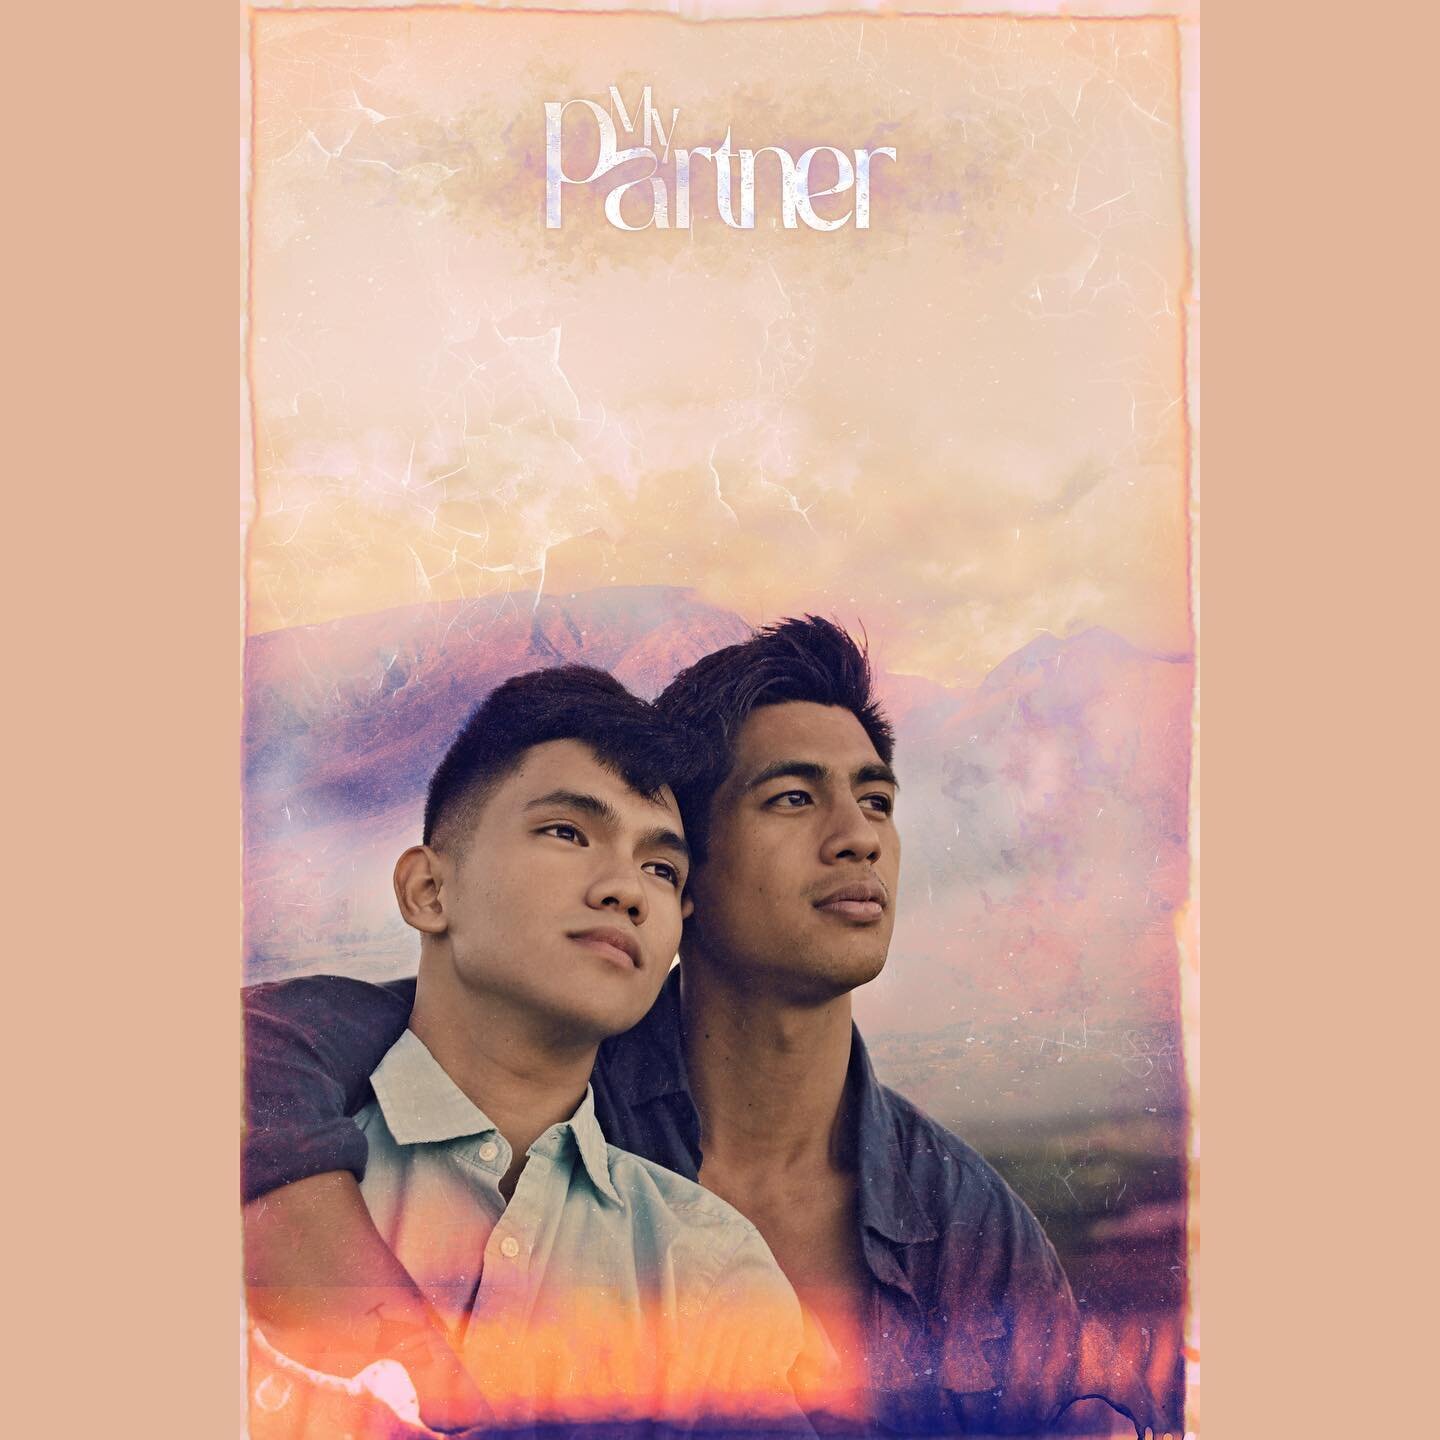 𝙎𝙖𝙖𝙣 𝙣𝙖 𝙩𝙖𝙮𝙤 𝙥𝙪𝙥𝙪𝙣𝙩𝙖? Where will we go from now? ✨❤️✨

#boysloveboys #blseries #blmovie #boys #filipino #filipinobl #hawaiianboy #hawaiianboys #pinoybl #hawaiianbl #mypartnermovie 

poster creation by @jess.t.johnston ⚡️❤️⚡️